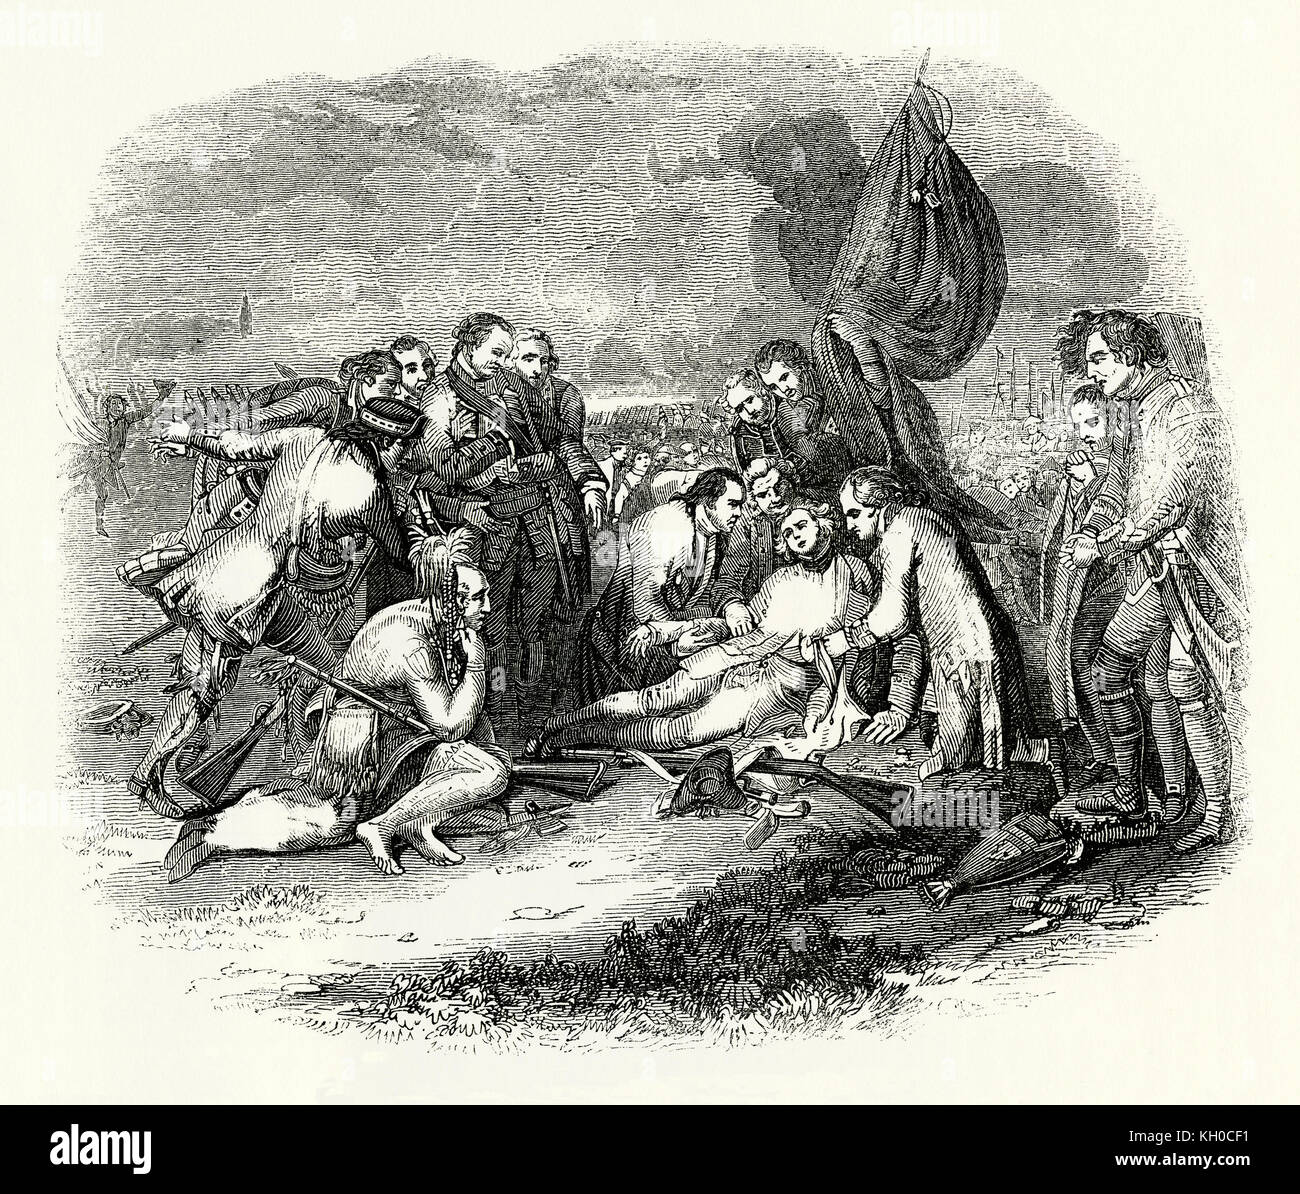 Old engraving showing the death of General James Wolfe at the 1759 Battle of Quebec during the French and Indian War - part of the Seven Years' War. It was also known as the Battle of the Plains of Abraham and took place on September 13 1759 Stock Photo